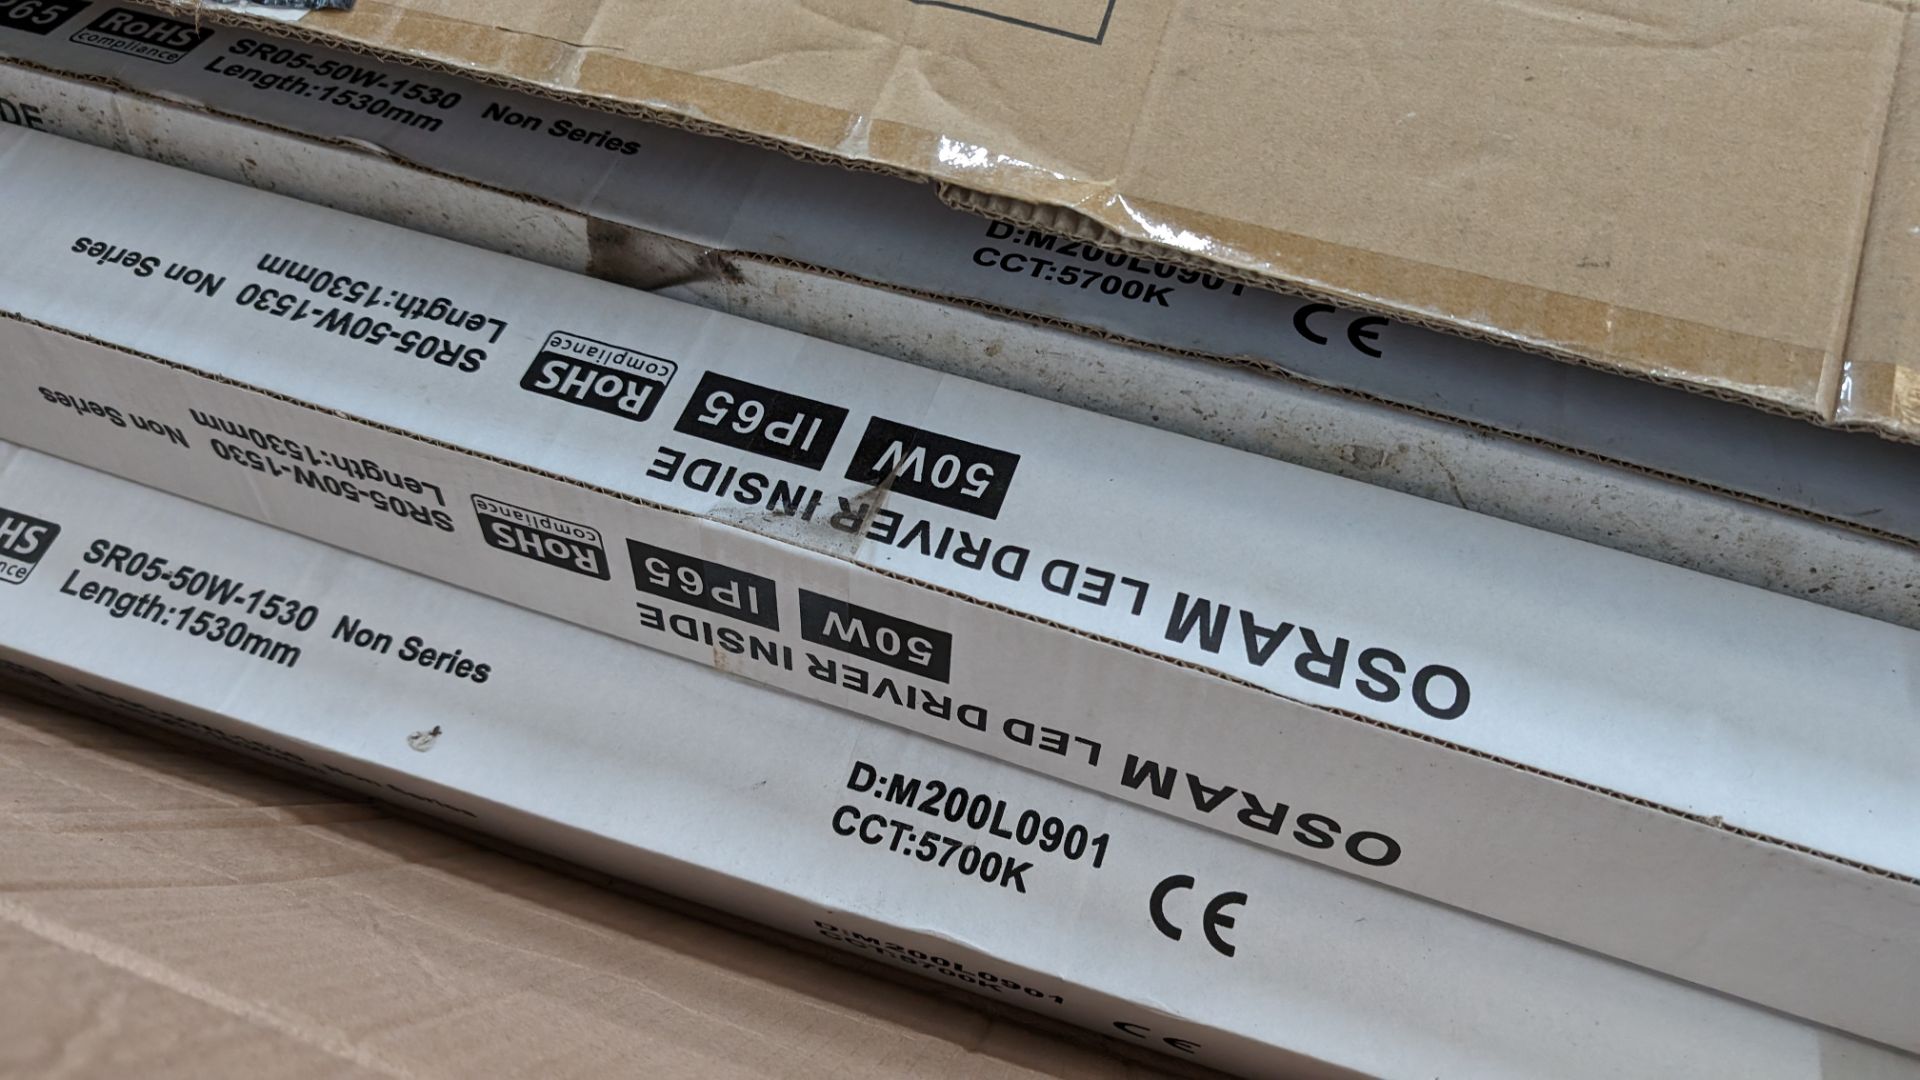 14 off Osram IP65 1530mm 5700k LED batten lighting units with Osram LED drivers - 1 full part and 1 - Image 4 of 5